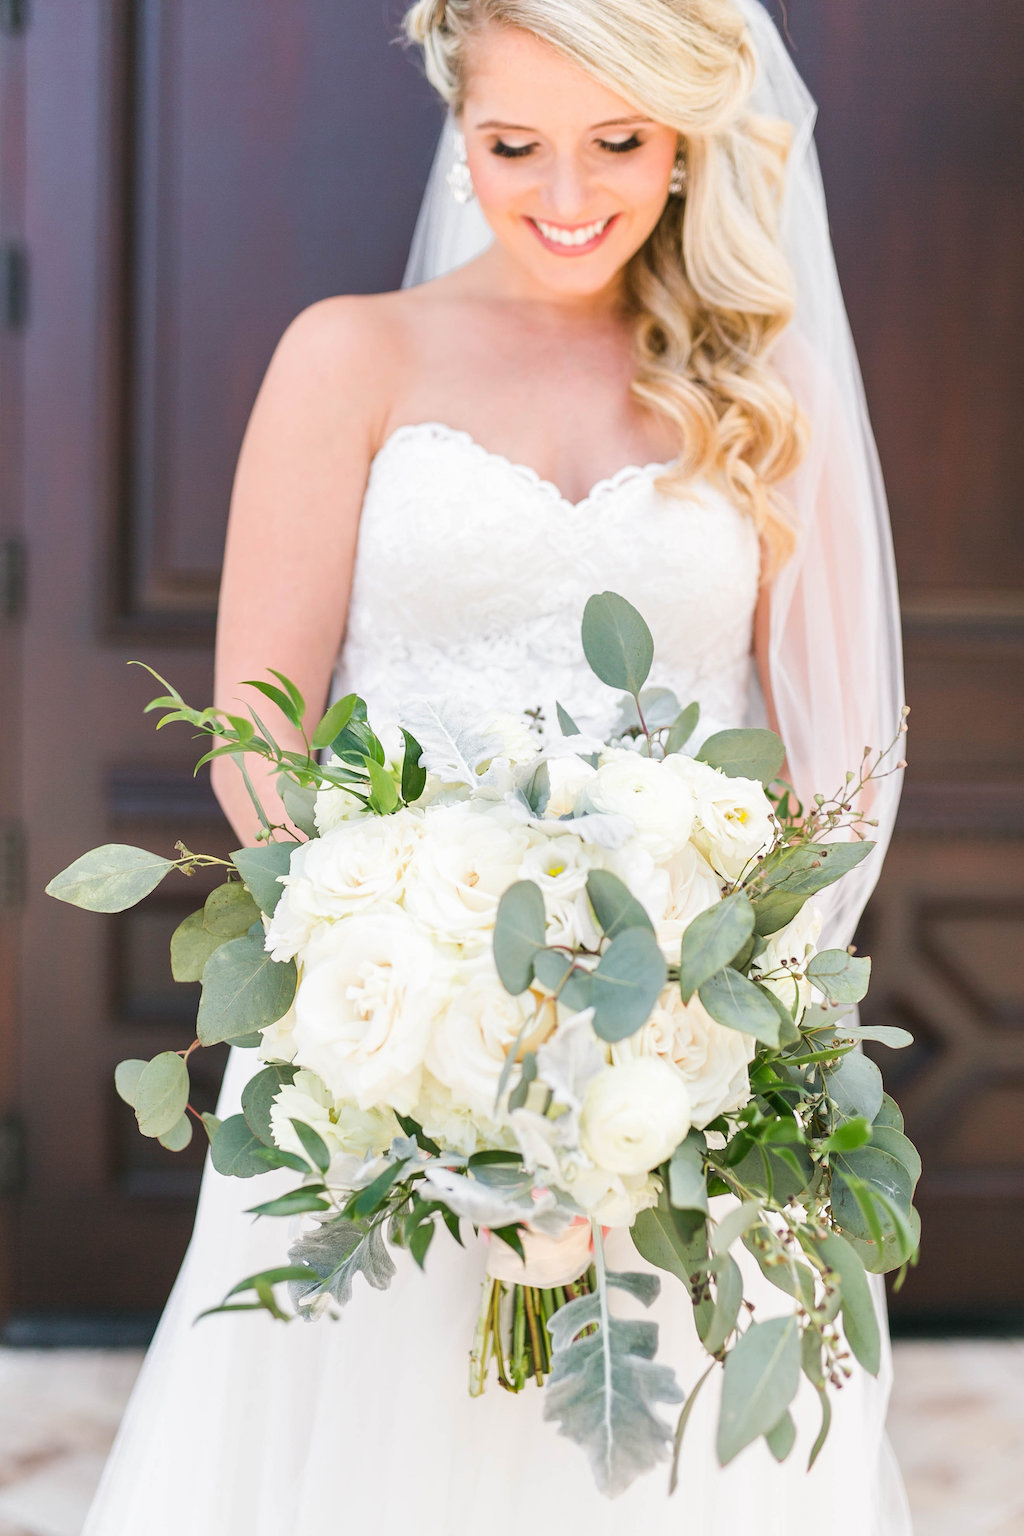 Bride Wedding Portrait in Strapless Sweetheart Lace A-Line Wedding Dress with Veil and Ivory White and Greenery Floral Bouquet | Tampa Bay Hair and Makeup Femme Akoi